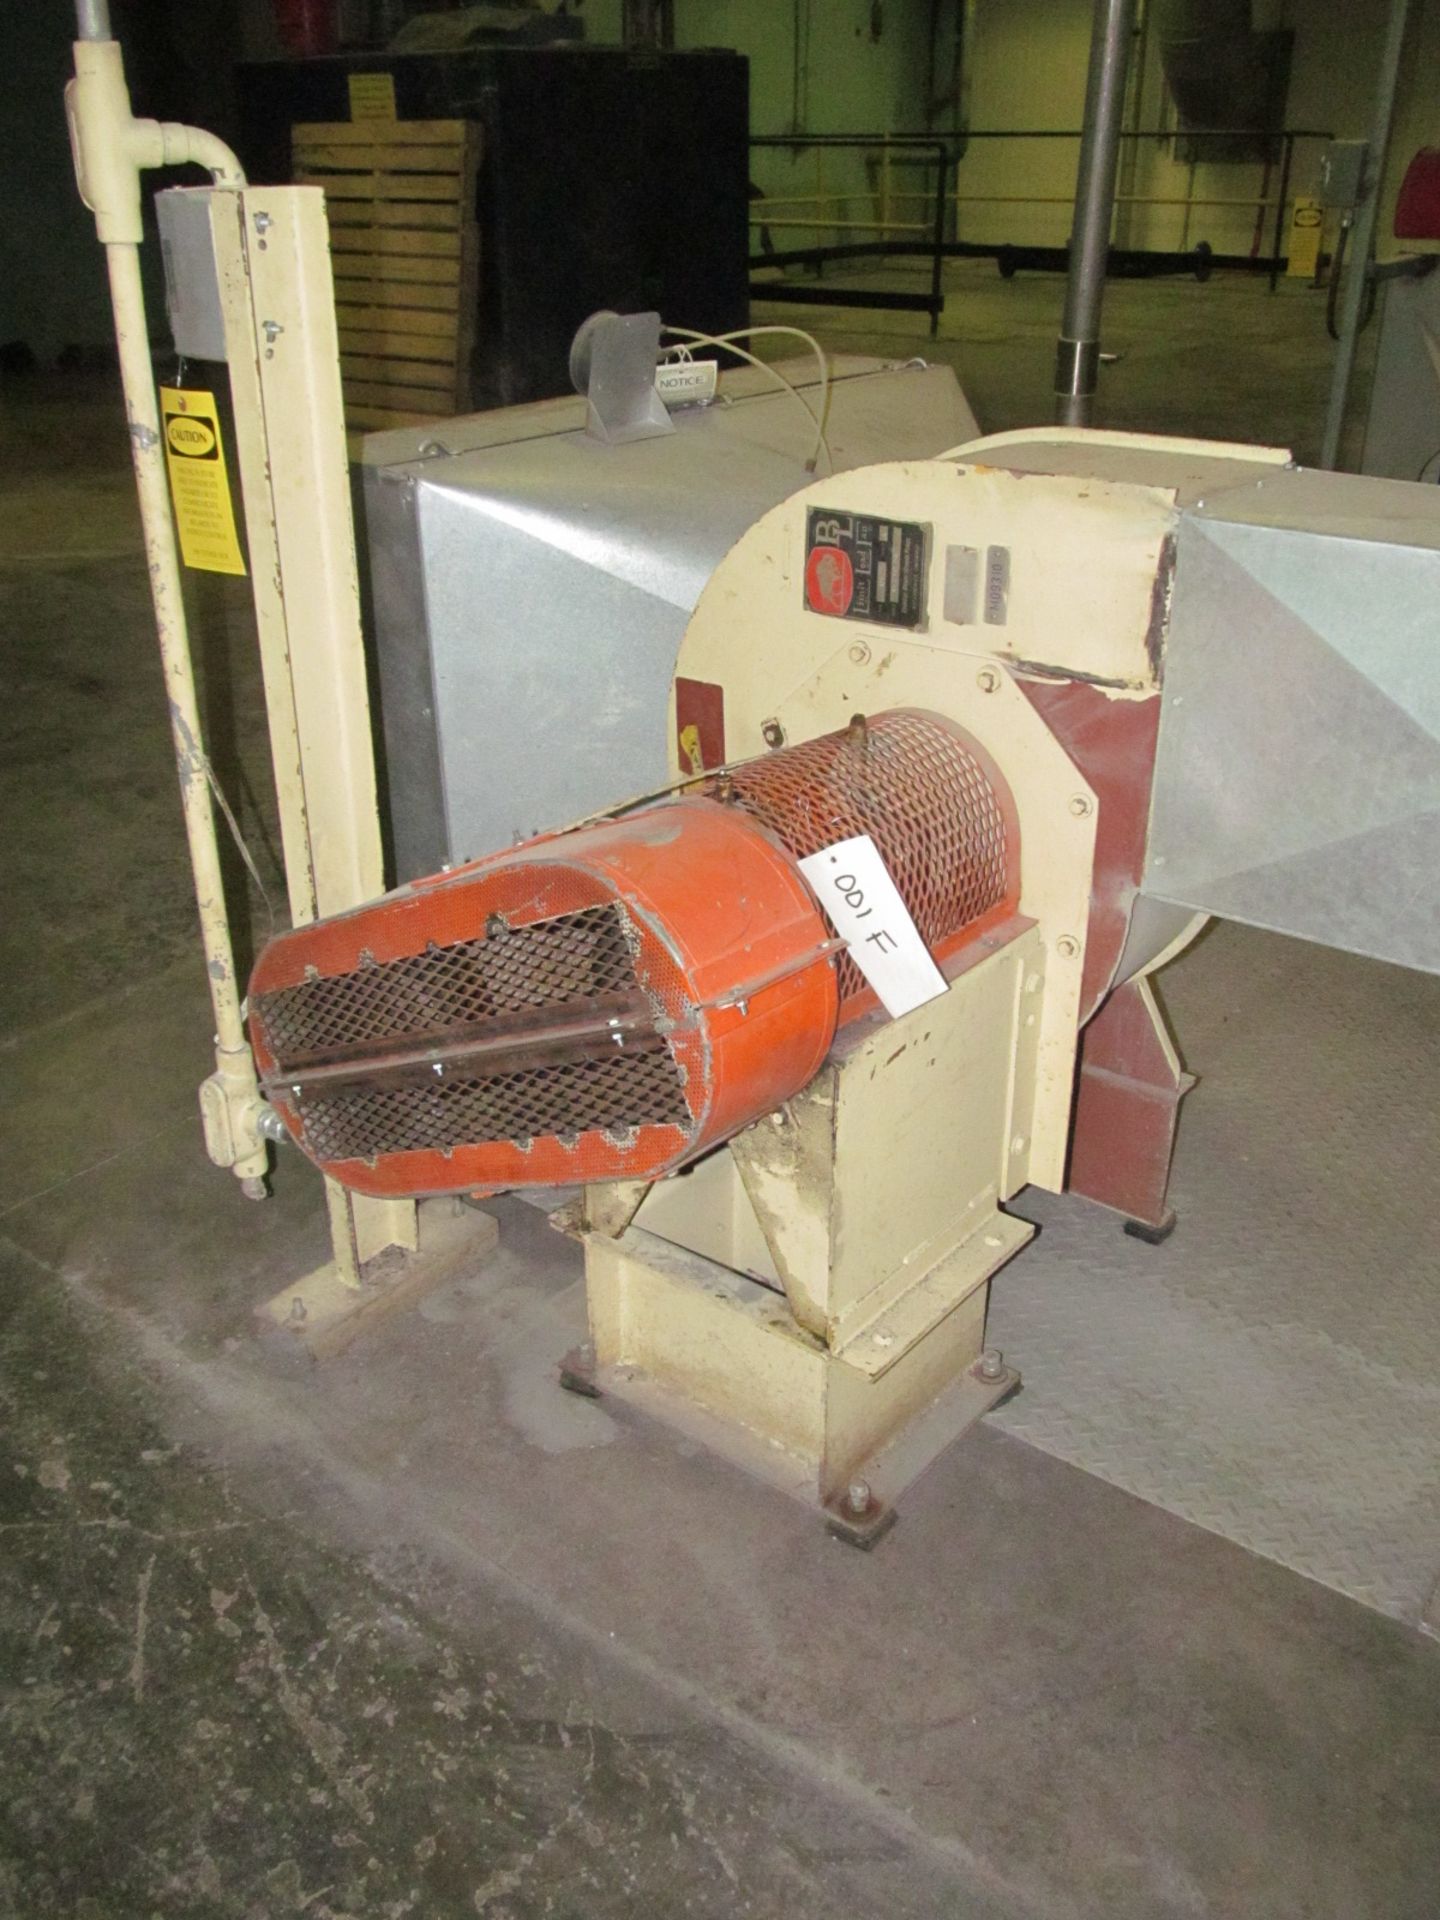 Witte Stainless Steel Vibratory Pellet Cooler Screener; Serial Number: 4258-2; Approximate 30" - Image 3 of 3